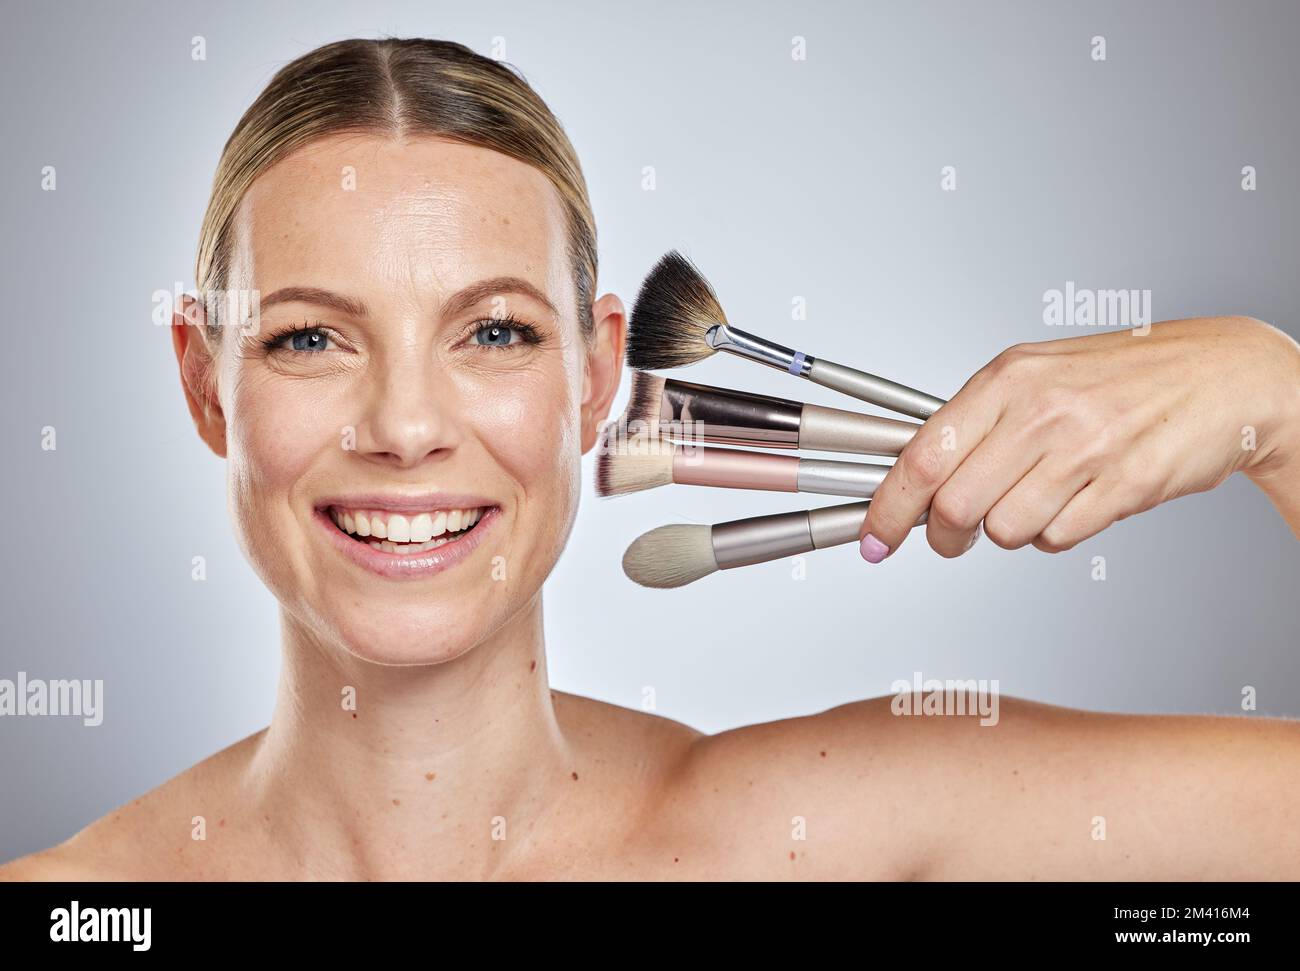 Woman, makeup brushes and portrait smile for cosmetics, beauty or facial treatment against a studio background. Happy face of female model smiling in Stock Photo